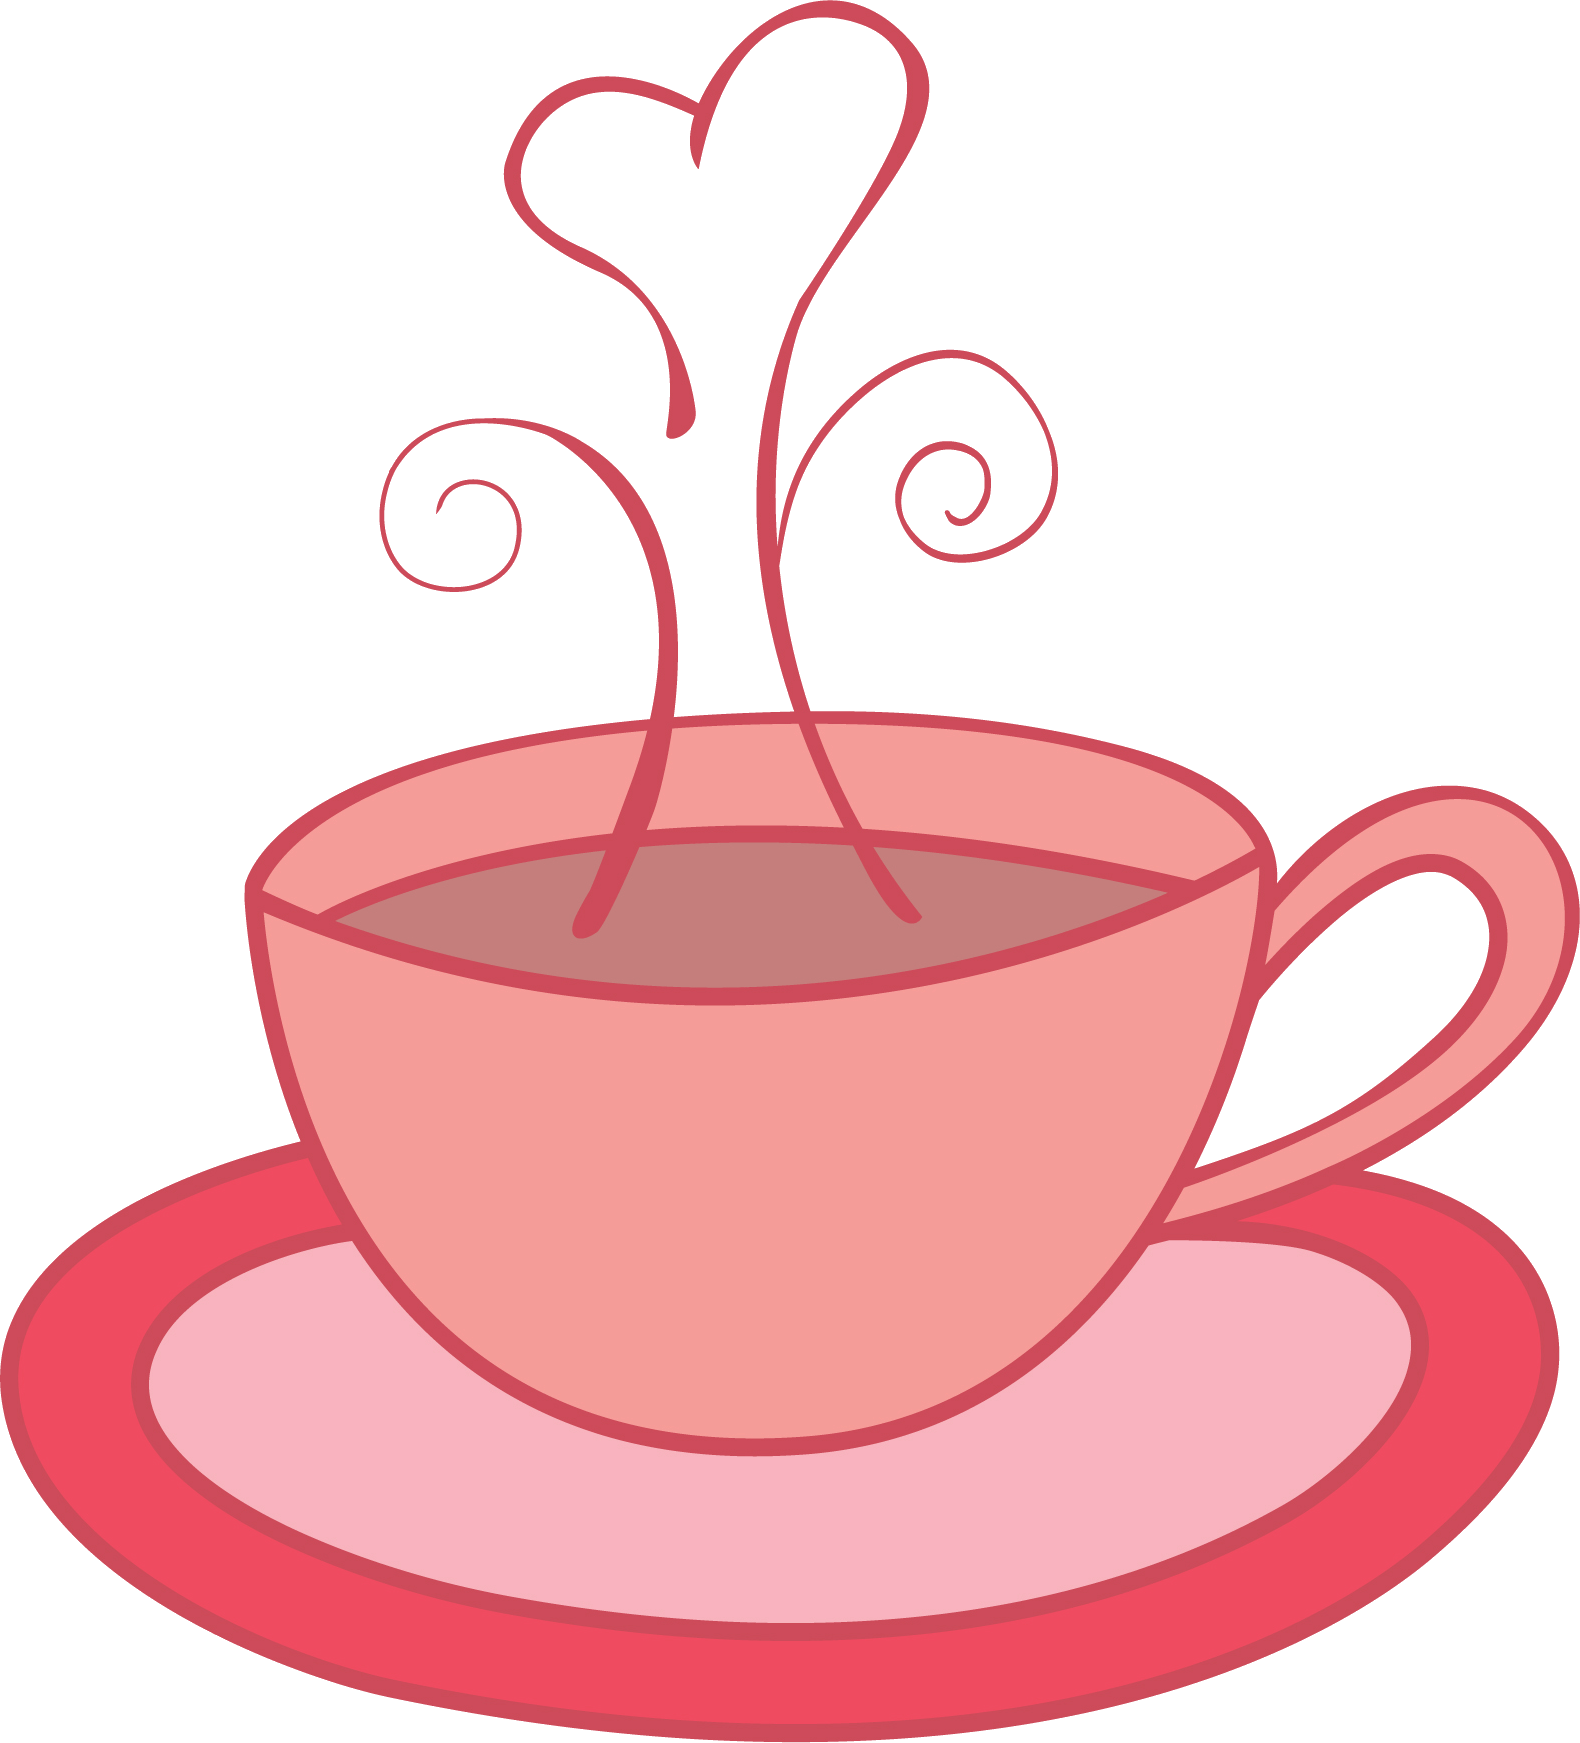 Teacup and teapot clipart